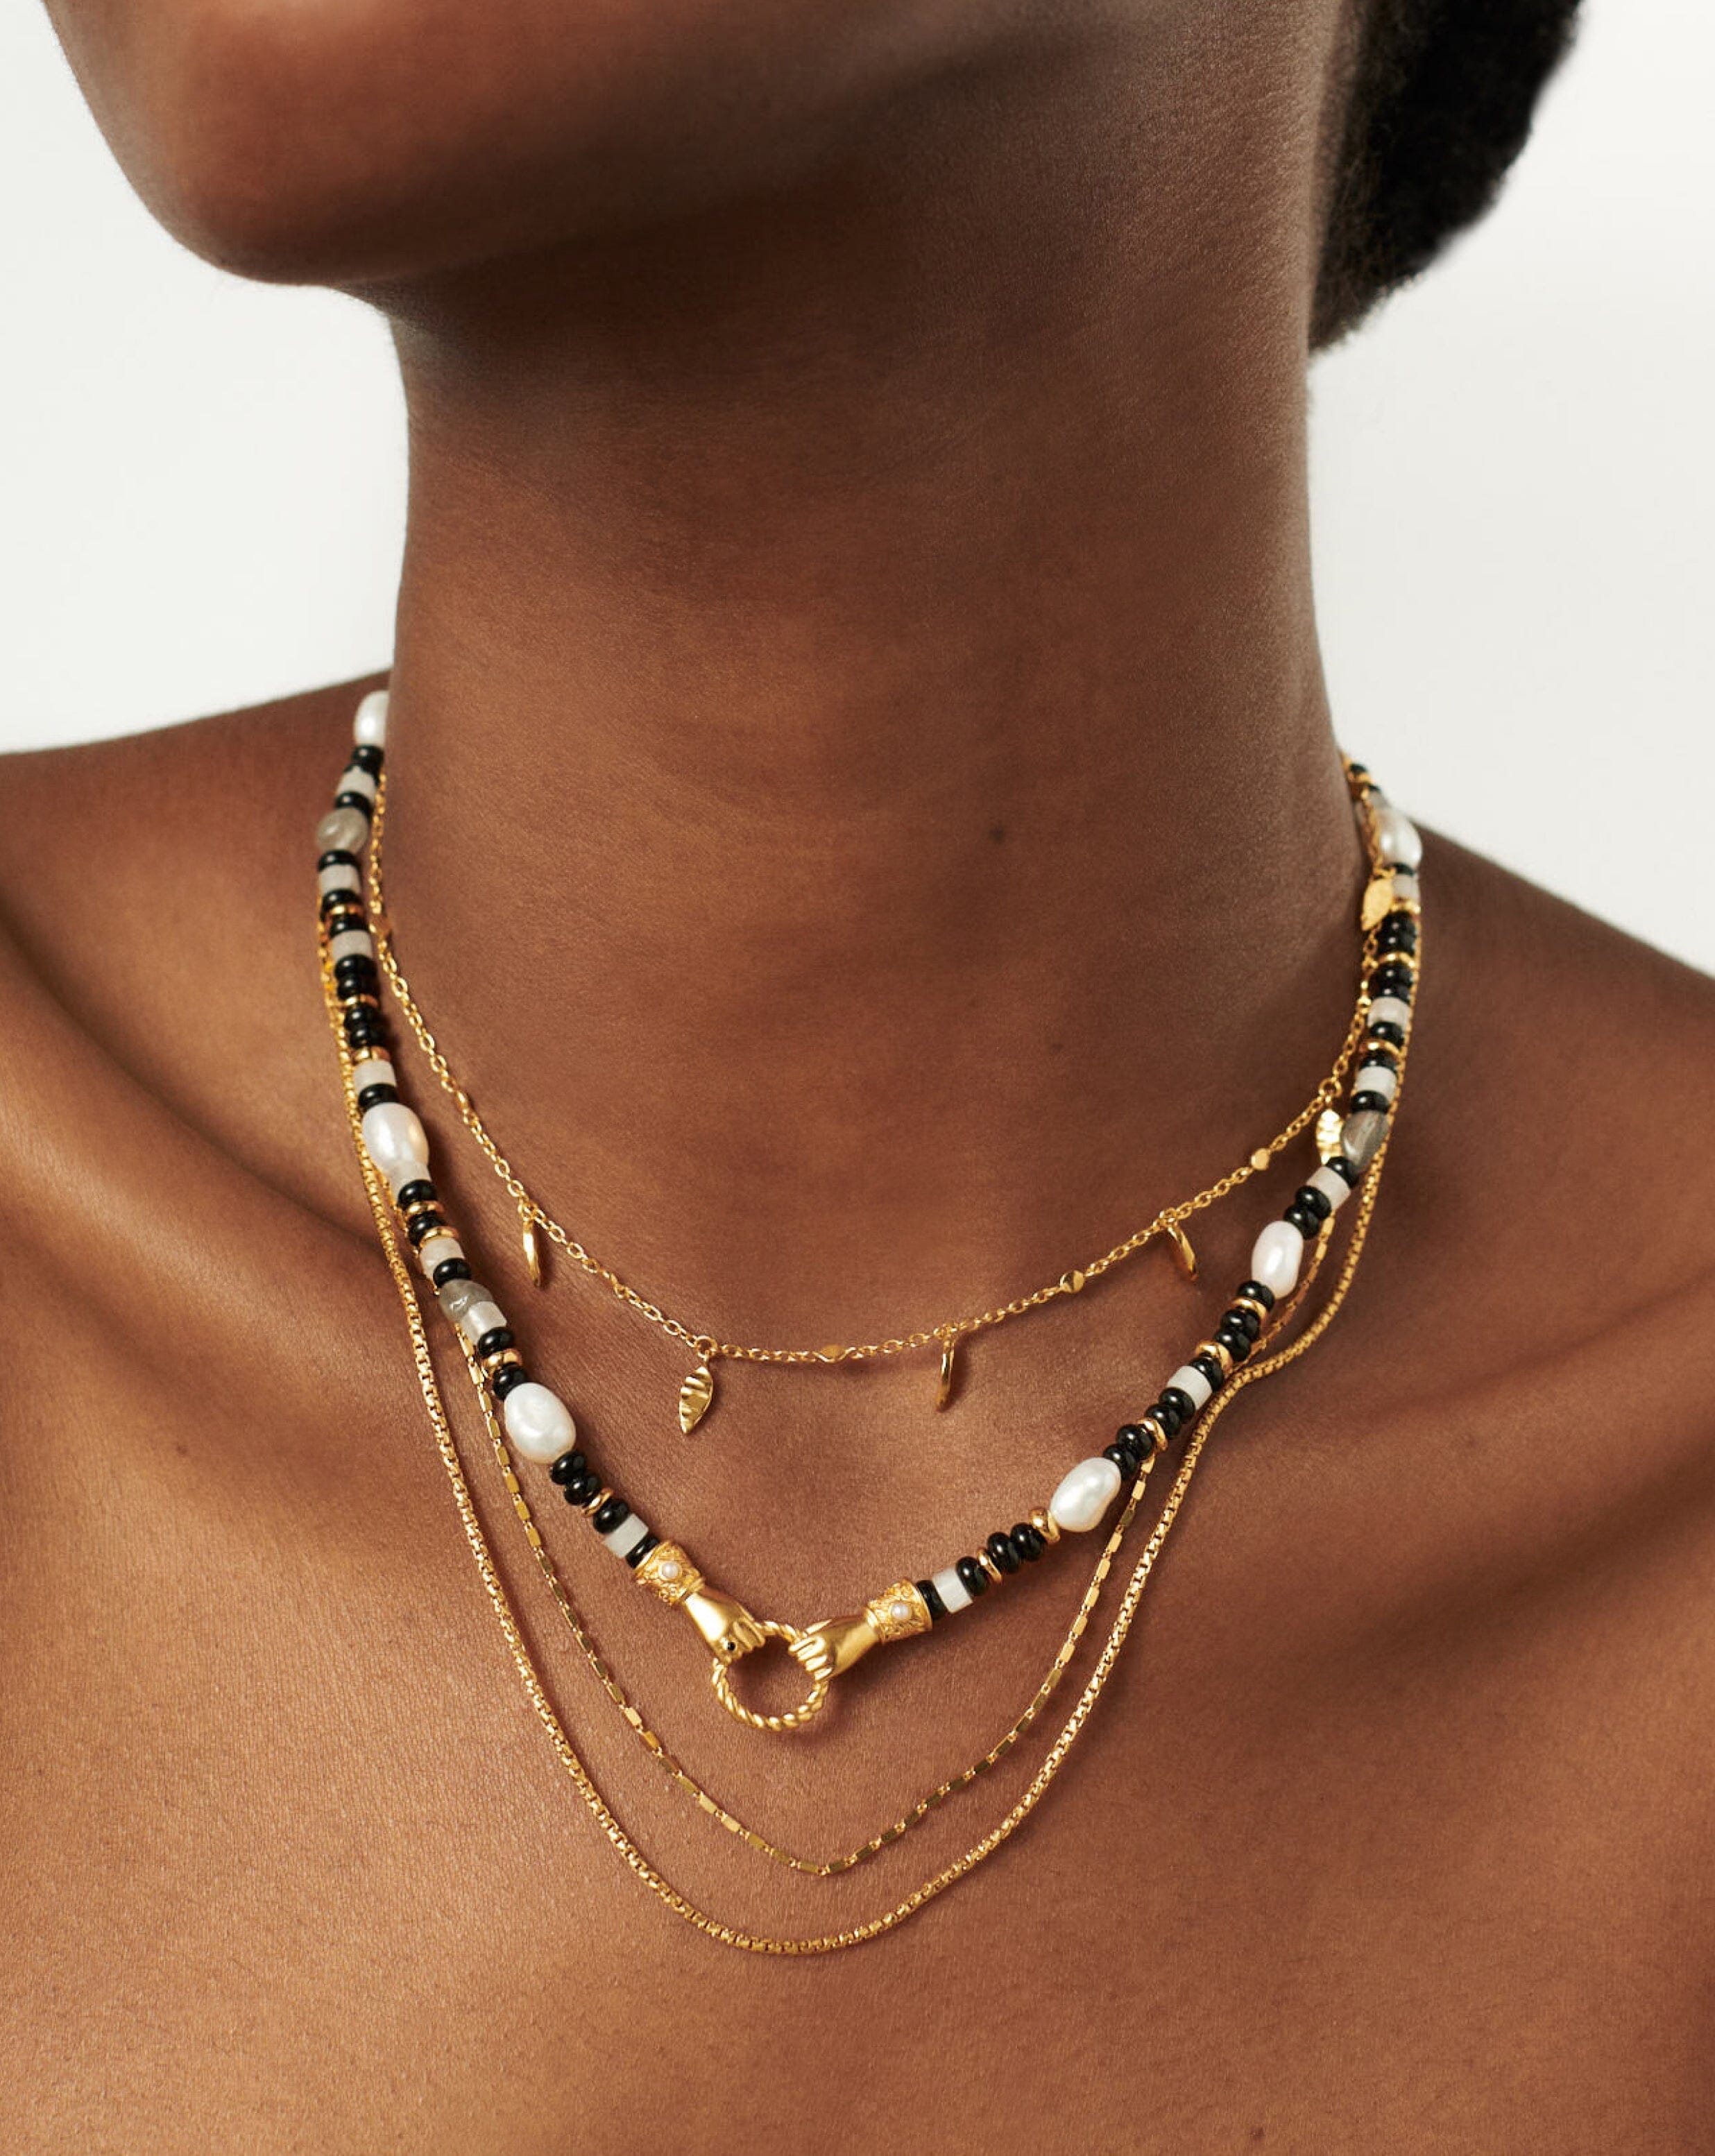 13 Beaded Necklaces That Nail The Whimsical Vibe